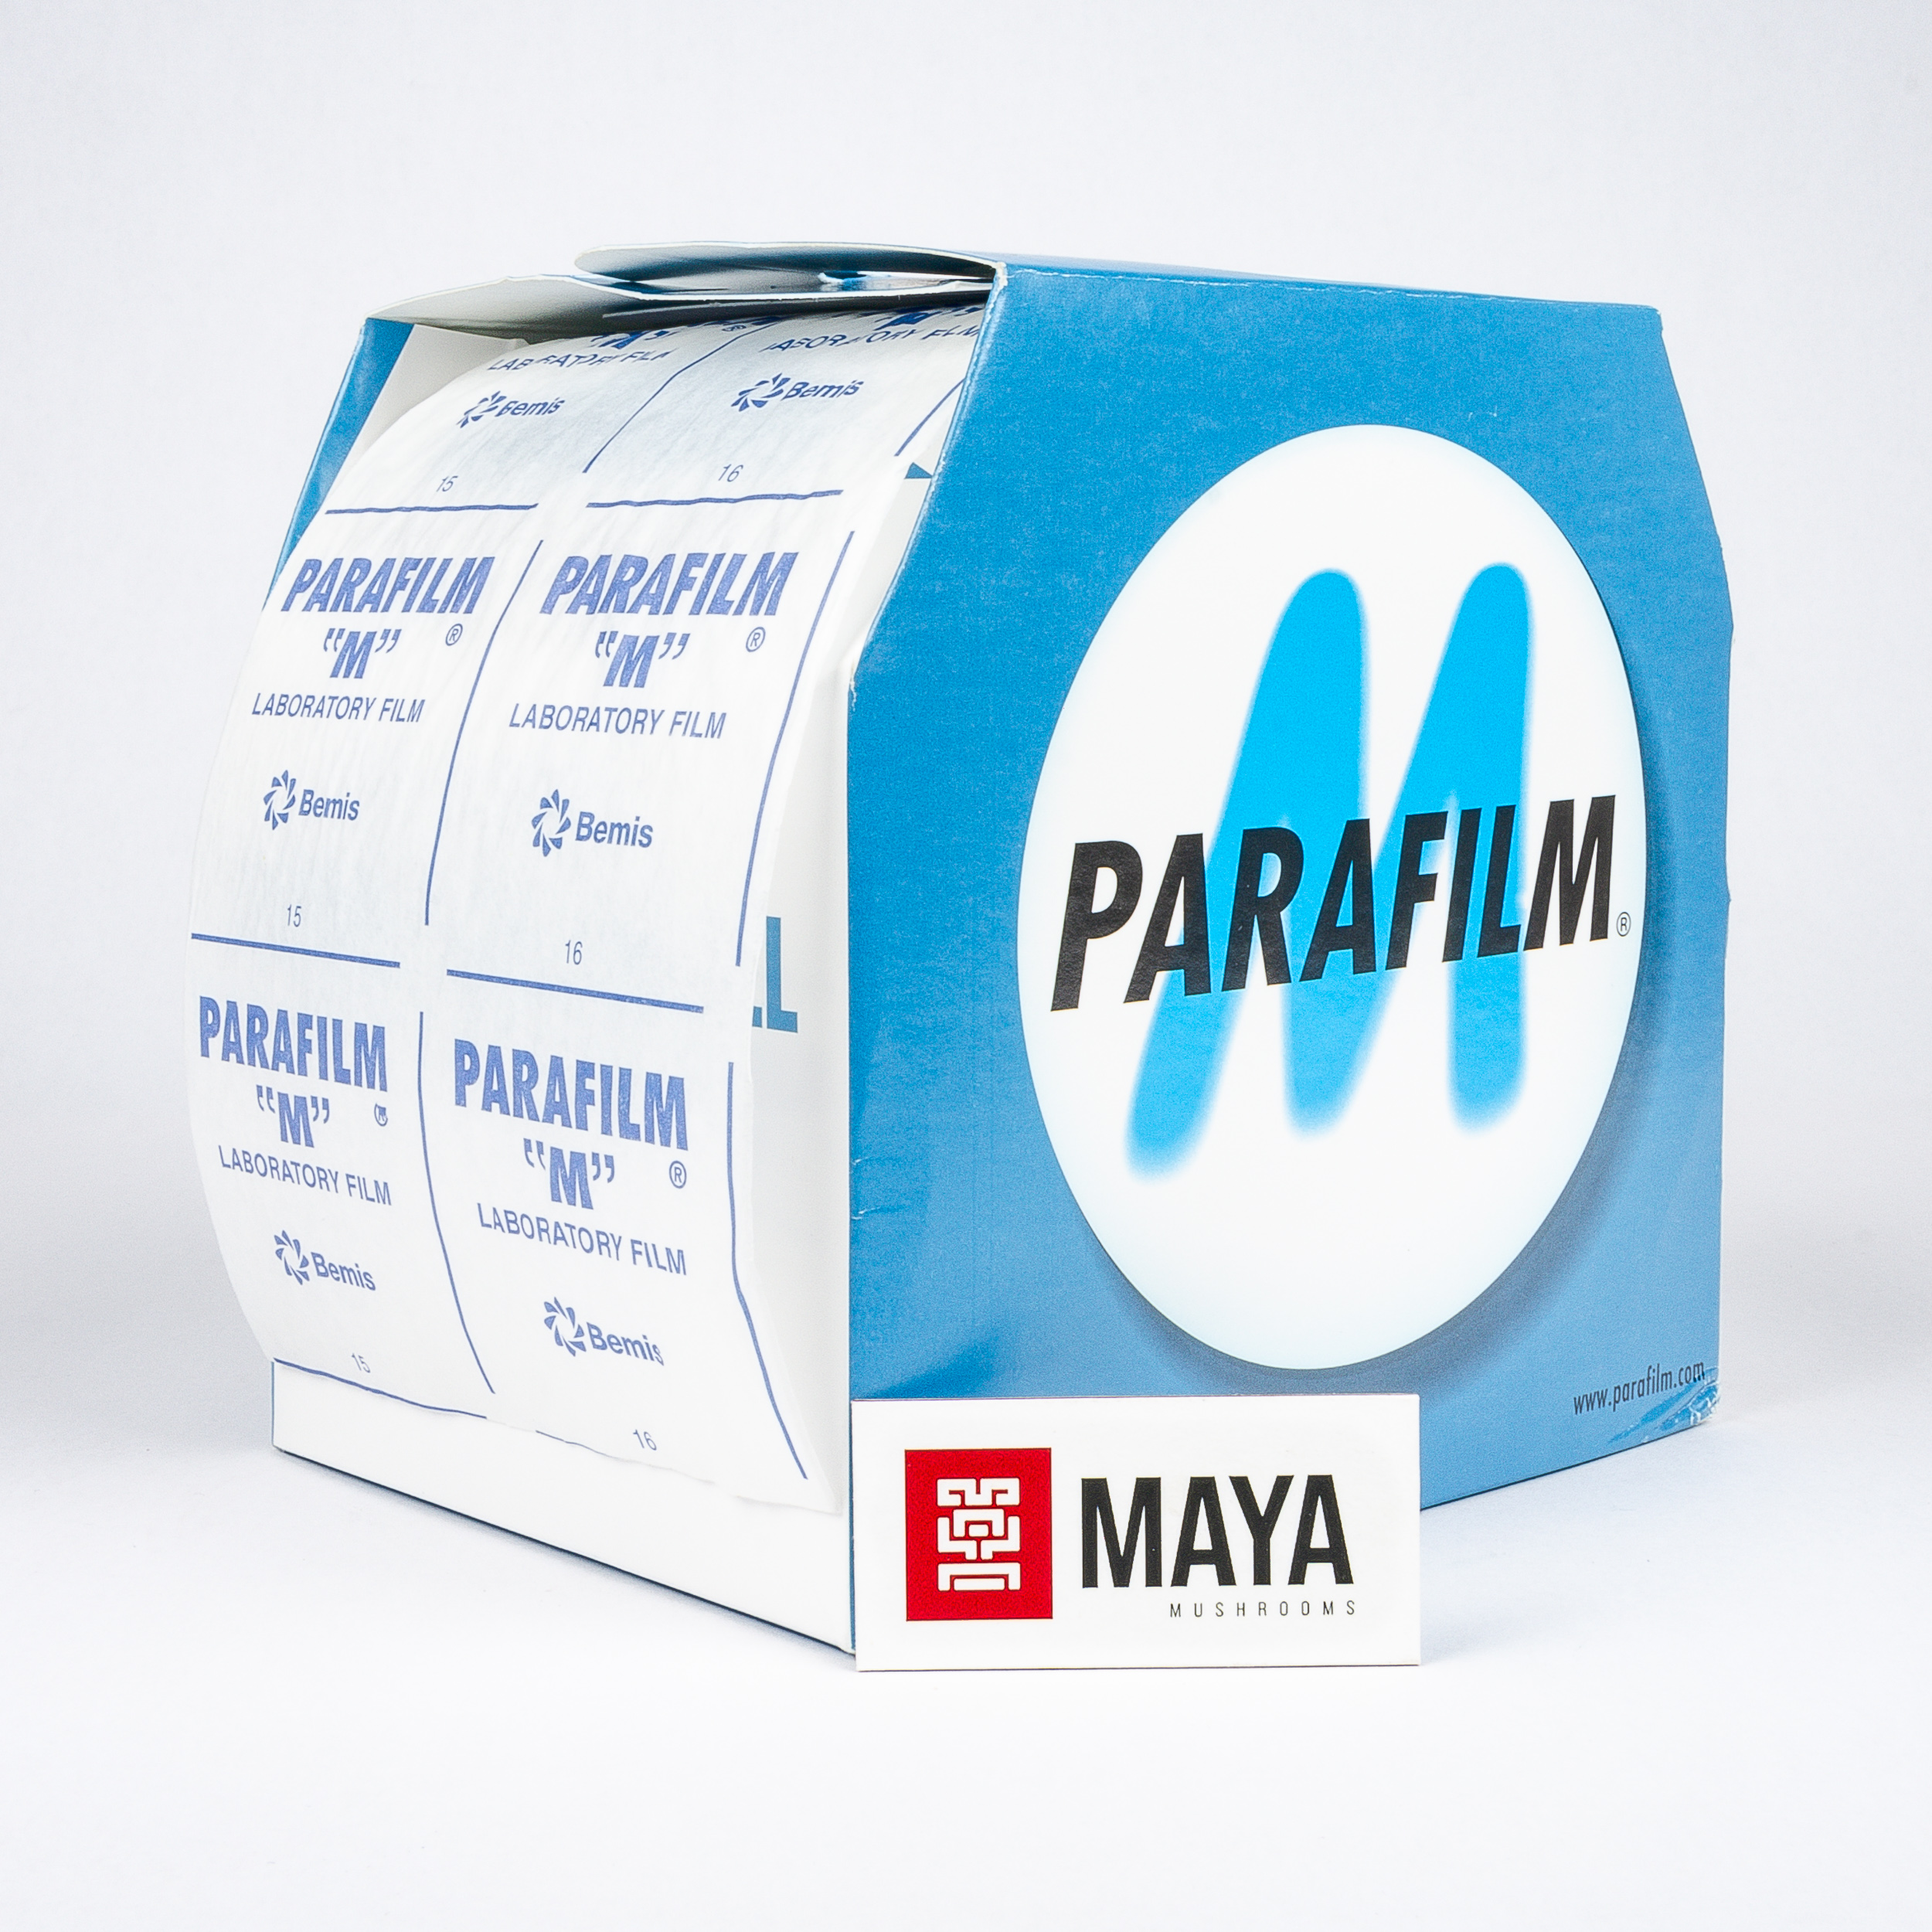 Parafilm 4-Inch Double Size Roll - Dispensed, Angled side view